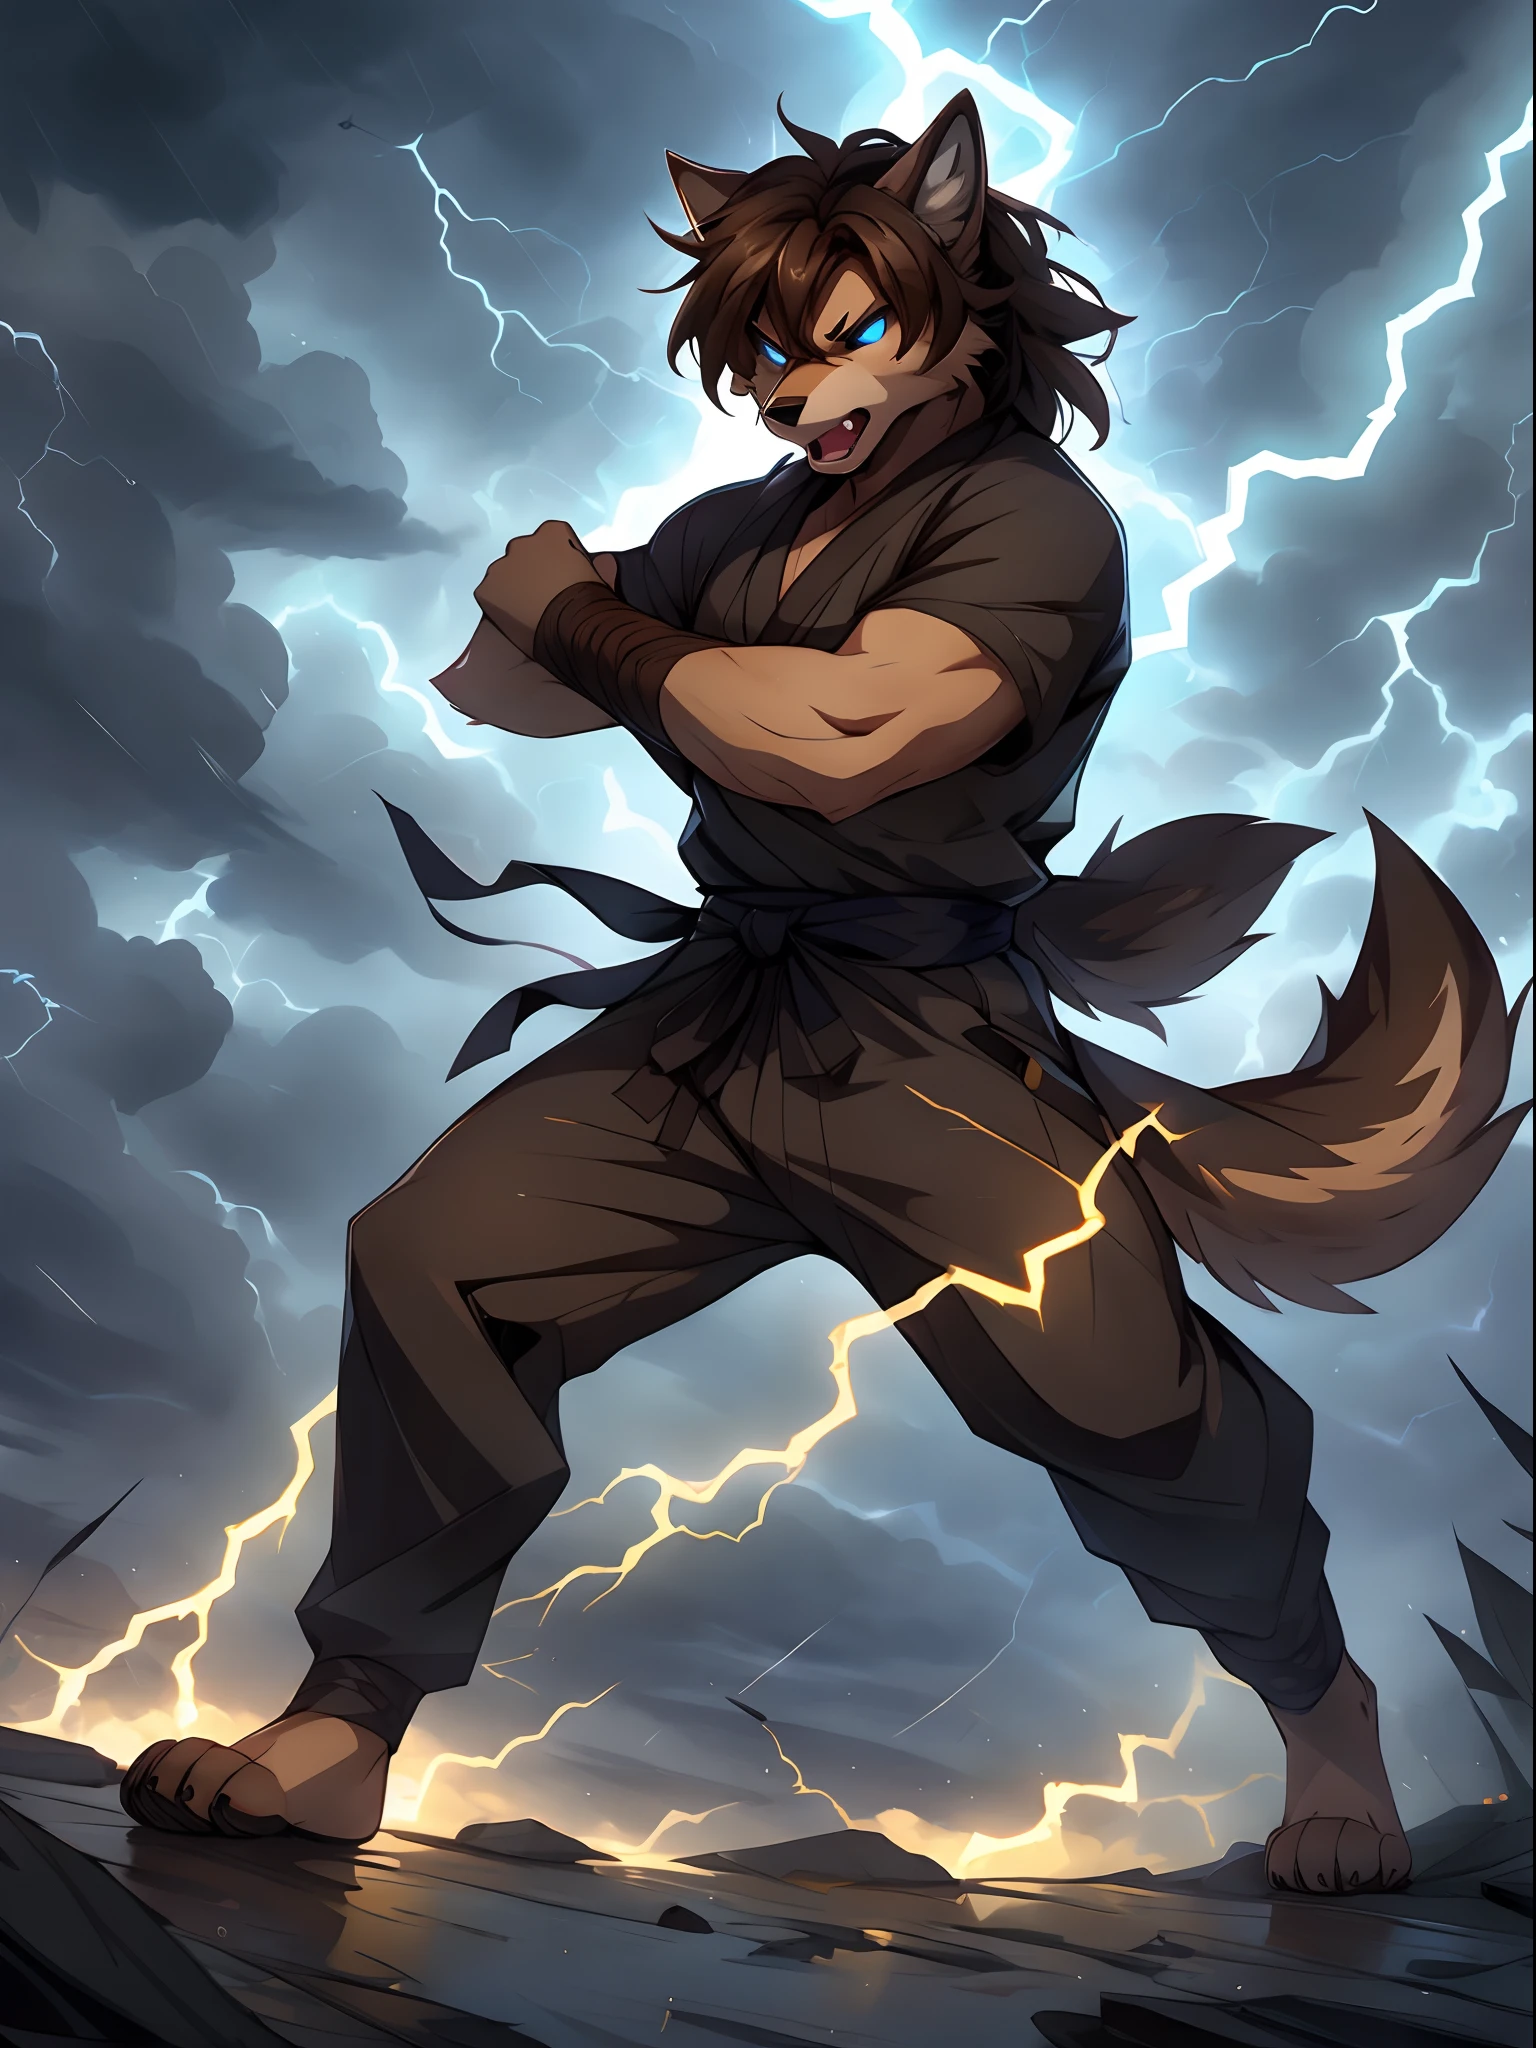 Jaiden, solo, brown wolf, dark brown shaggy hair, wearing hand wraps, ninja shirt, hakama pants, barefoot, feet paws, 4 toes, ninja stance, outdoors, thunderstorm outside, stormy weather, surrounded by thunder energy, electricity surging from his arms, glowing blue eyes, yelling, angry face, brown wolf tail